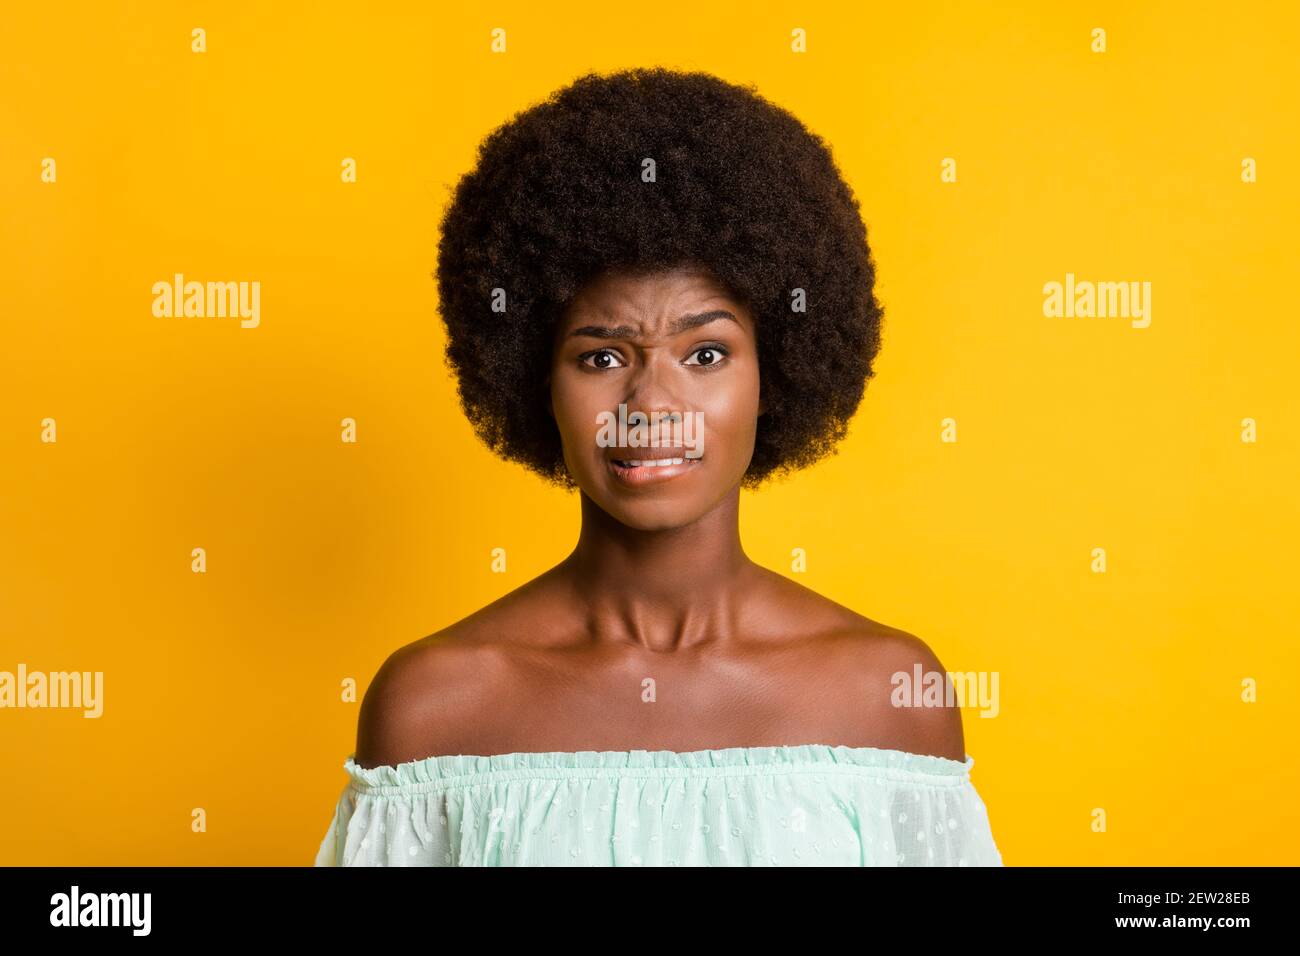 Photo portrait of confused girl biting lower lip isolated on vivid yellow colored background Stock Photo